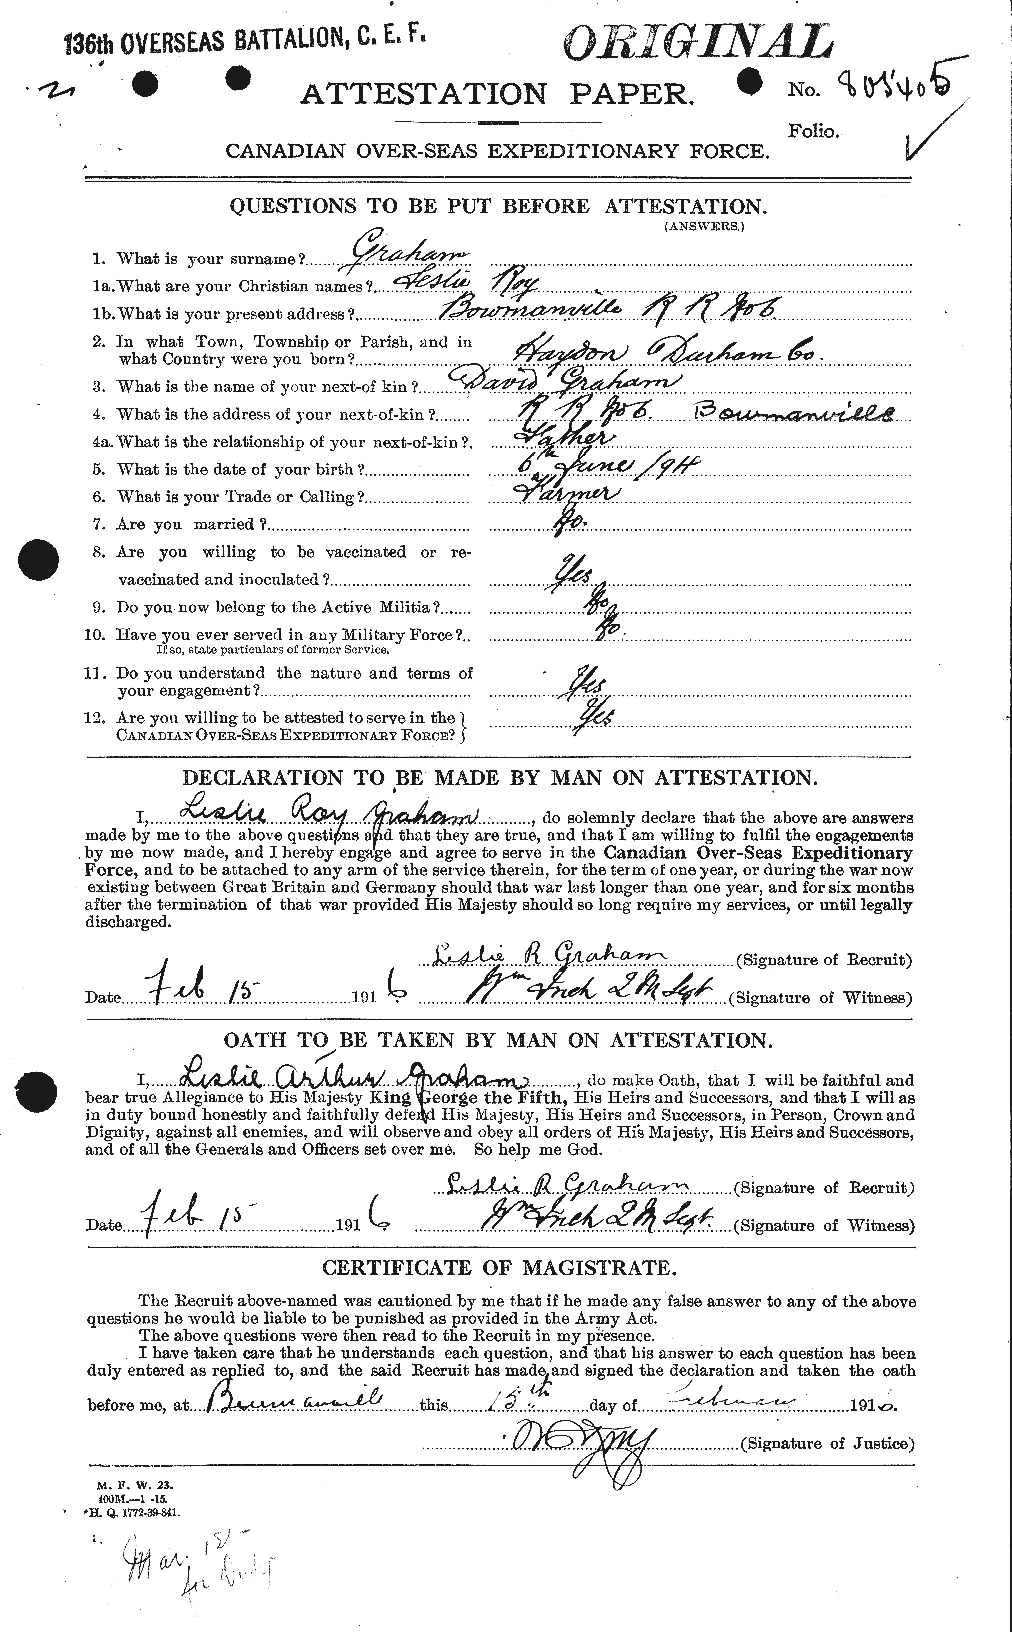 Personnel Records of the First World War - CEF 359272a